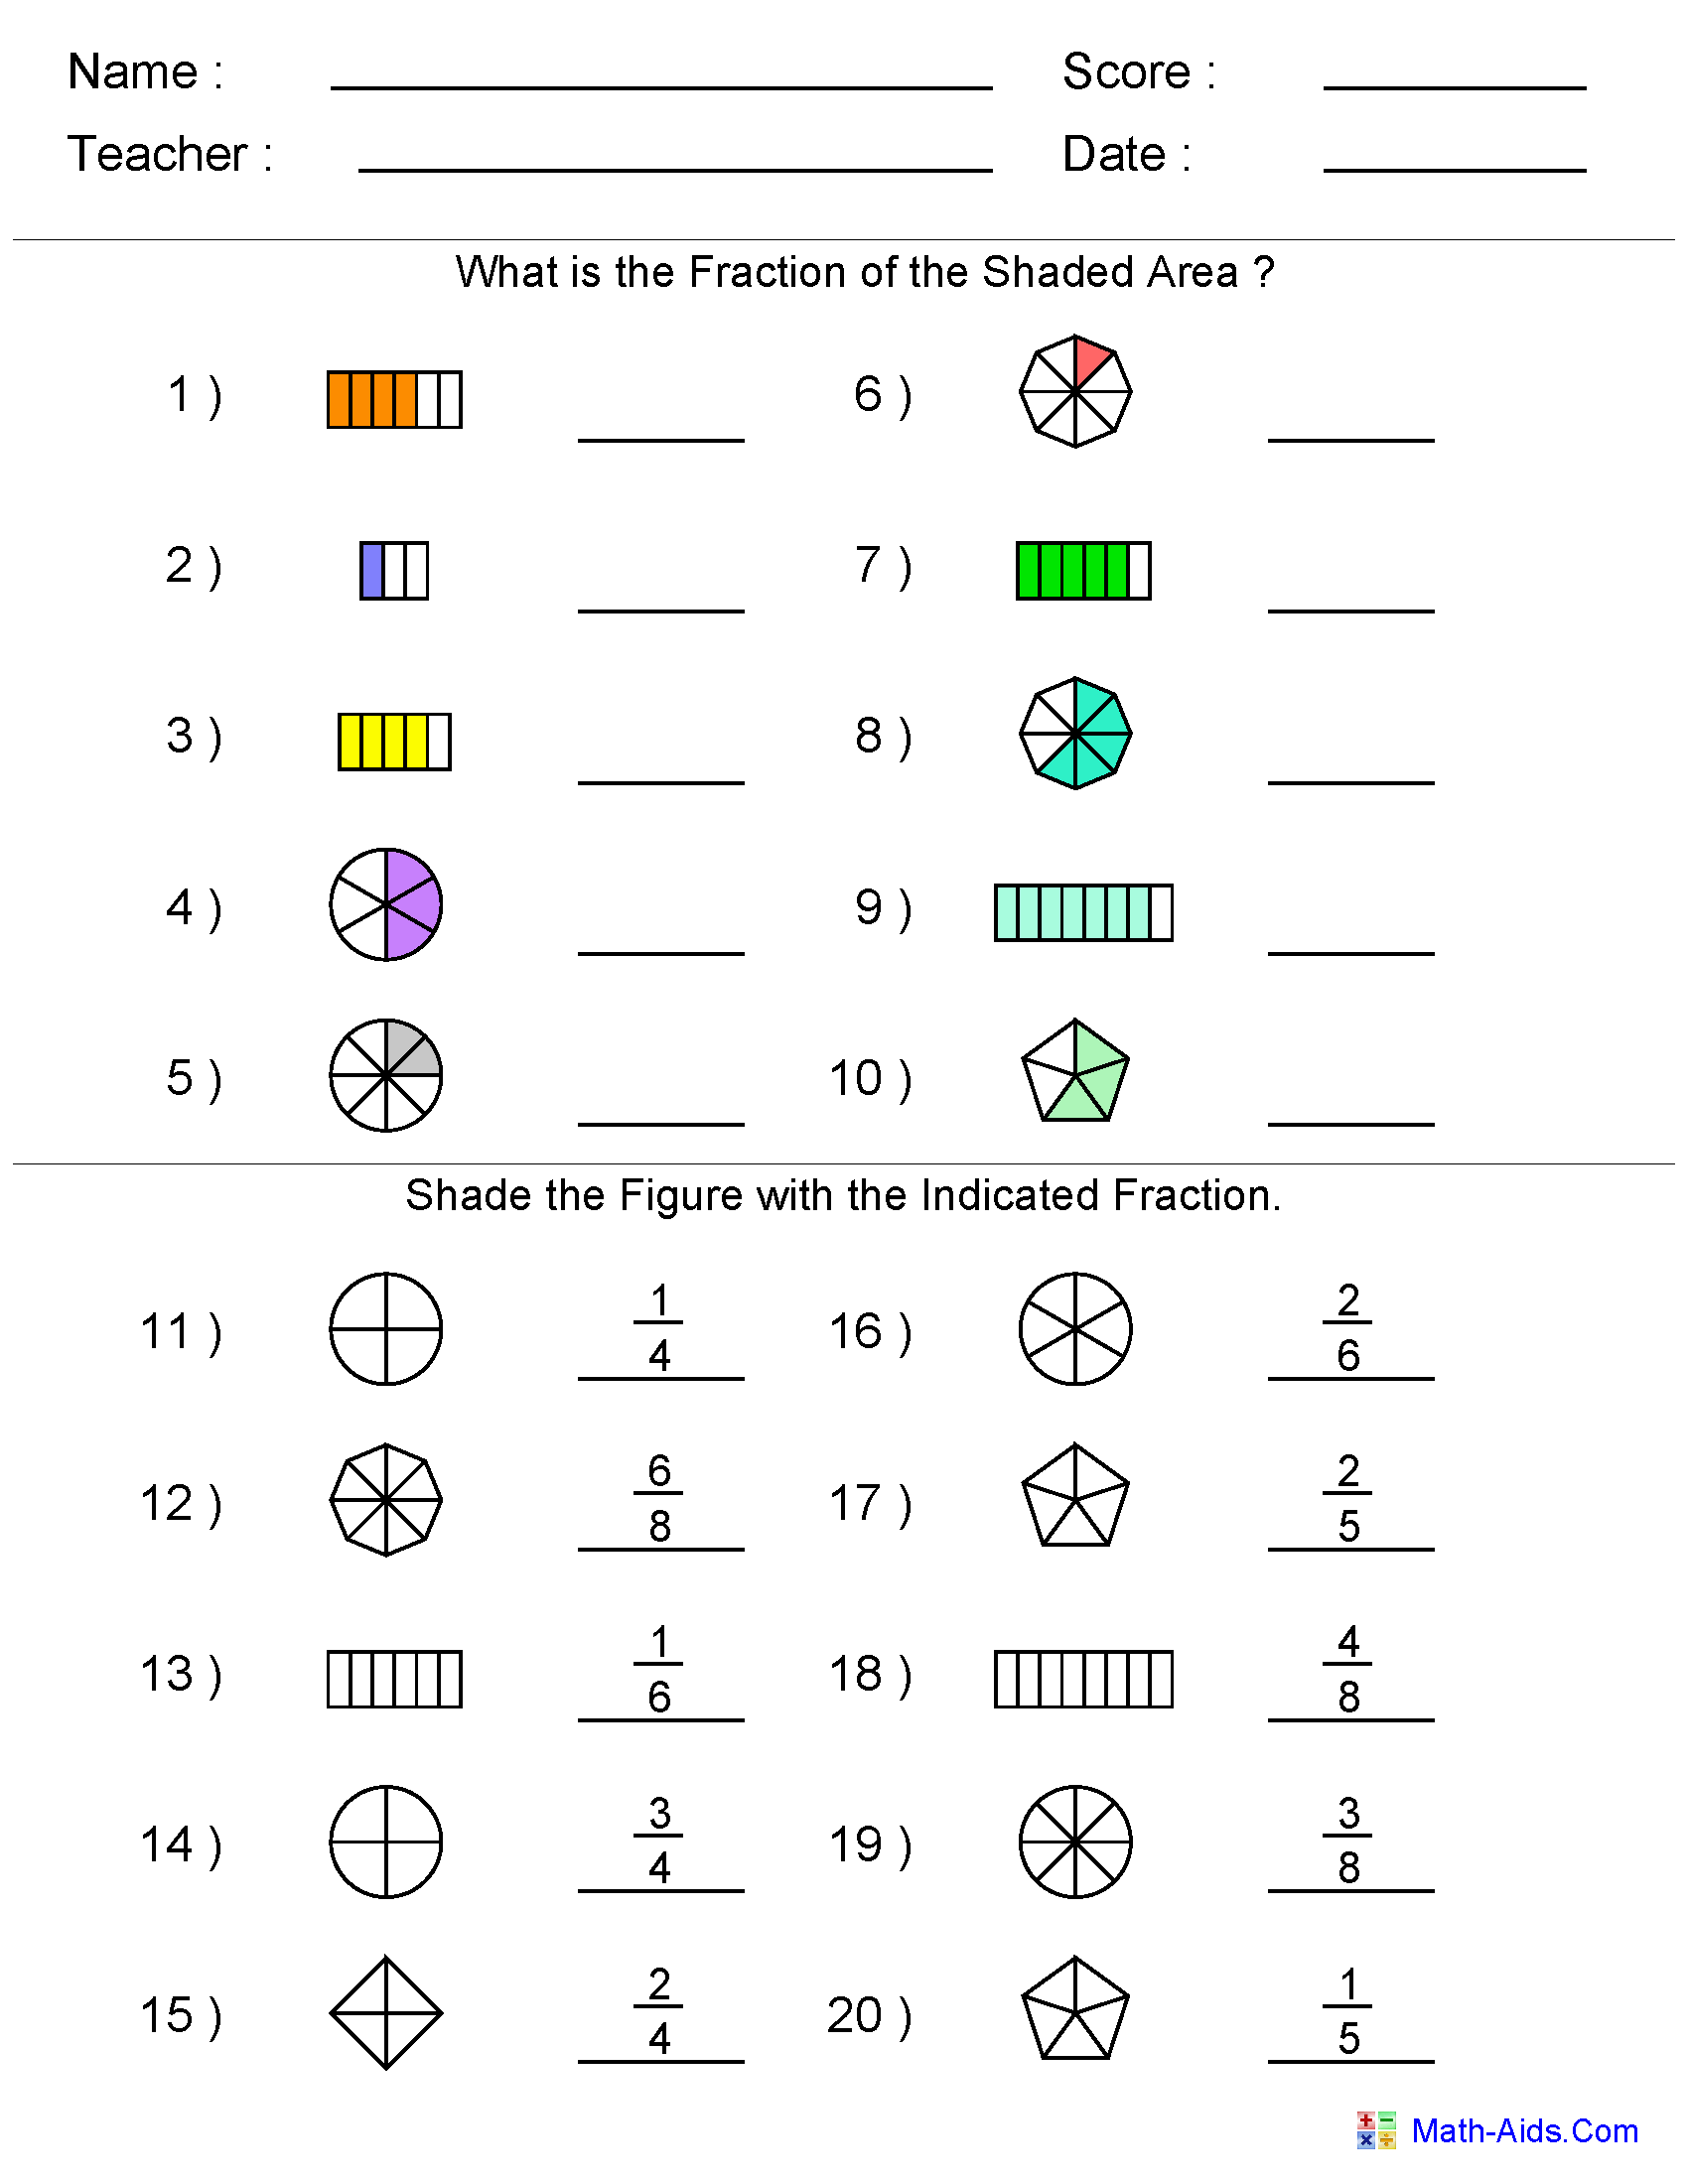 Fractions Worksheets | Printable Fractions Worksheets For Teachers pertaining to Free Printable Fraction Worksheets